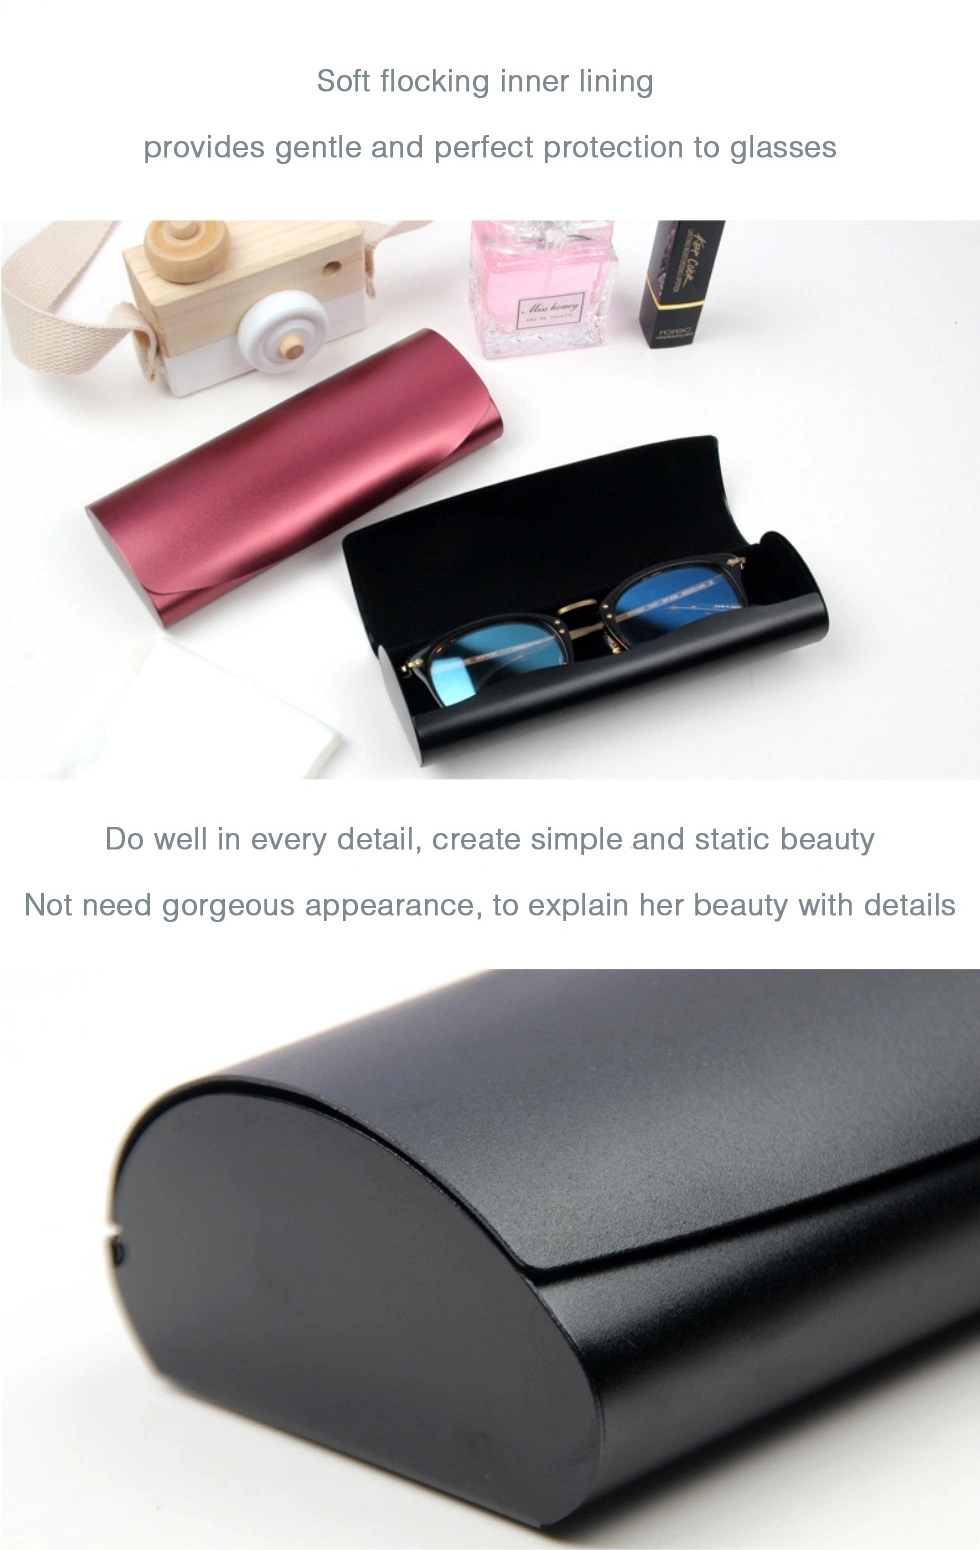 Sturdy, Glittered Aluminium Eyeglasses Case; Unbranded, Personalized Hard Protective Case for Reading Glasses and Sunglasses